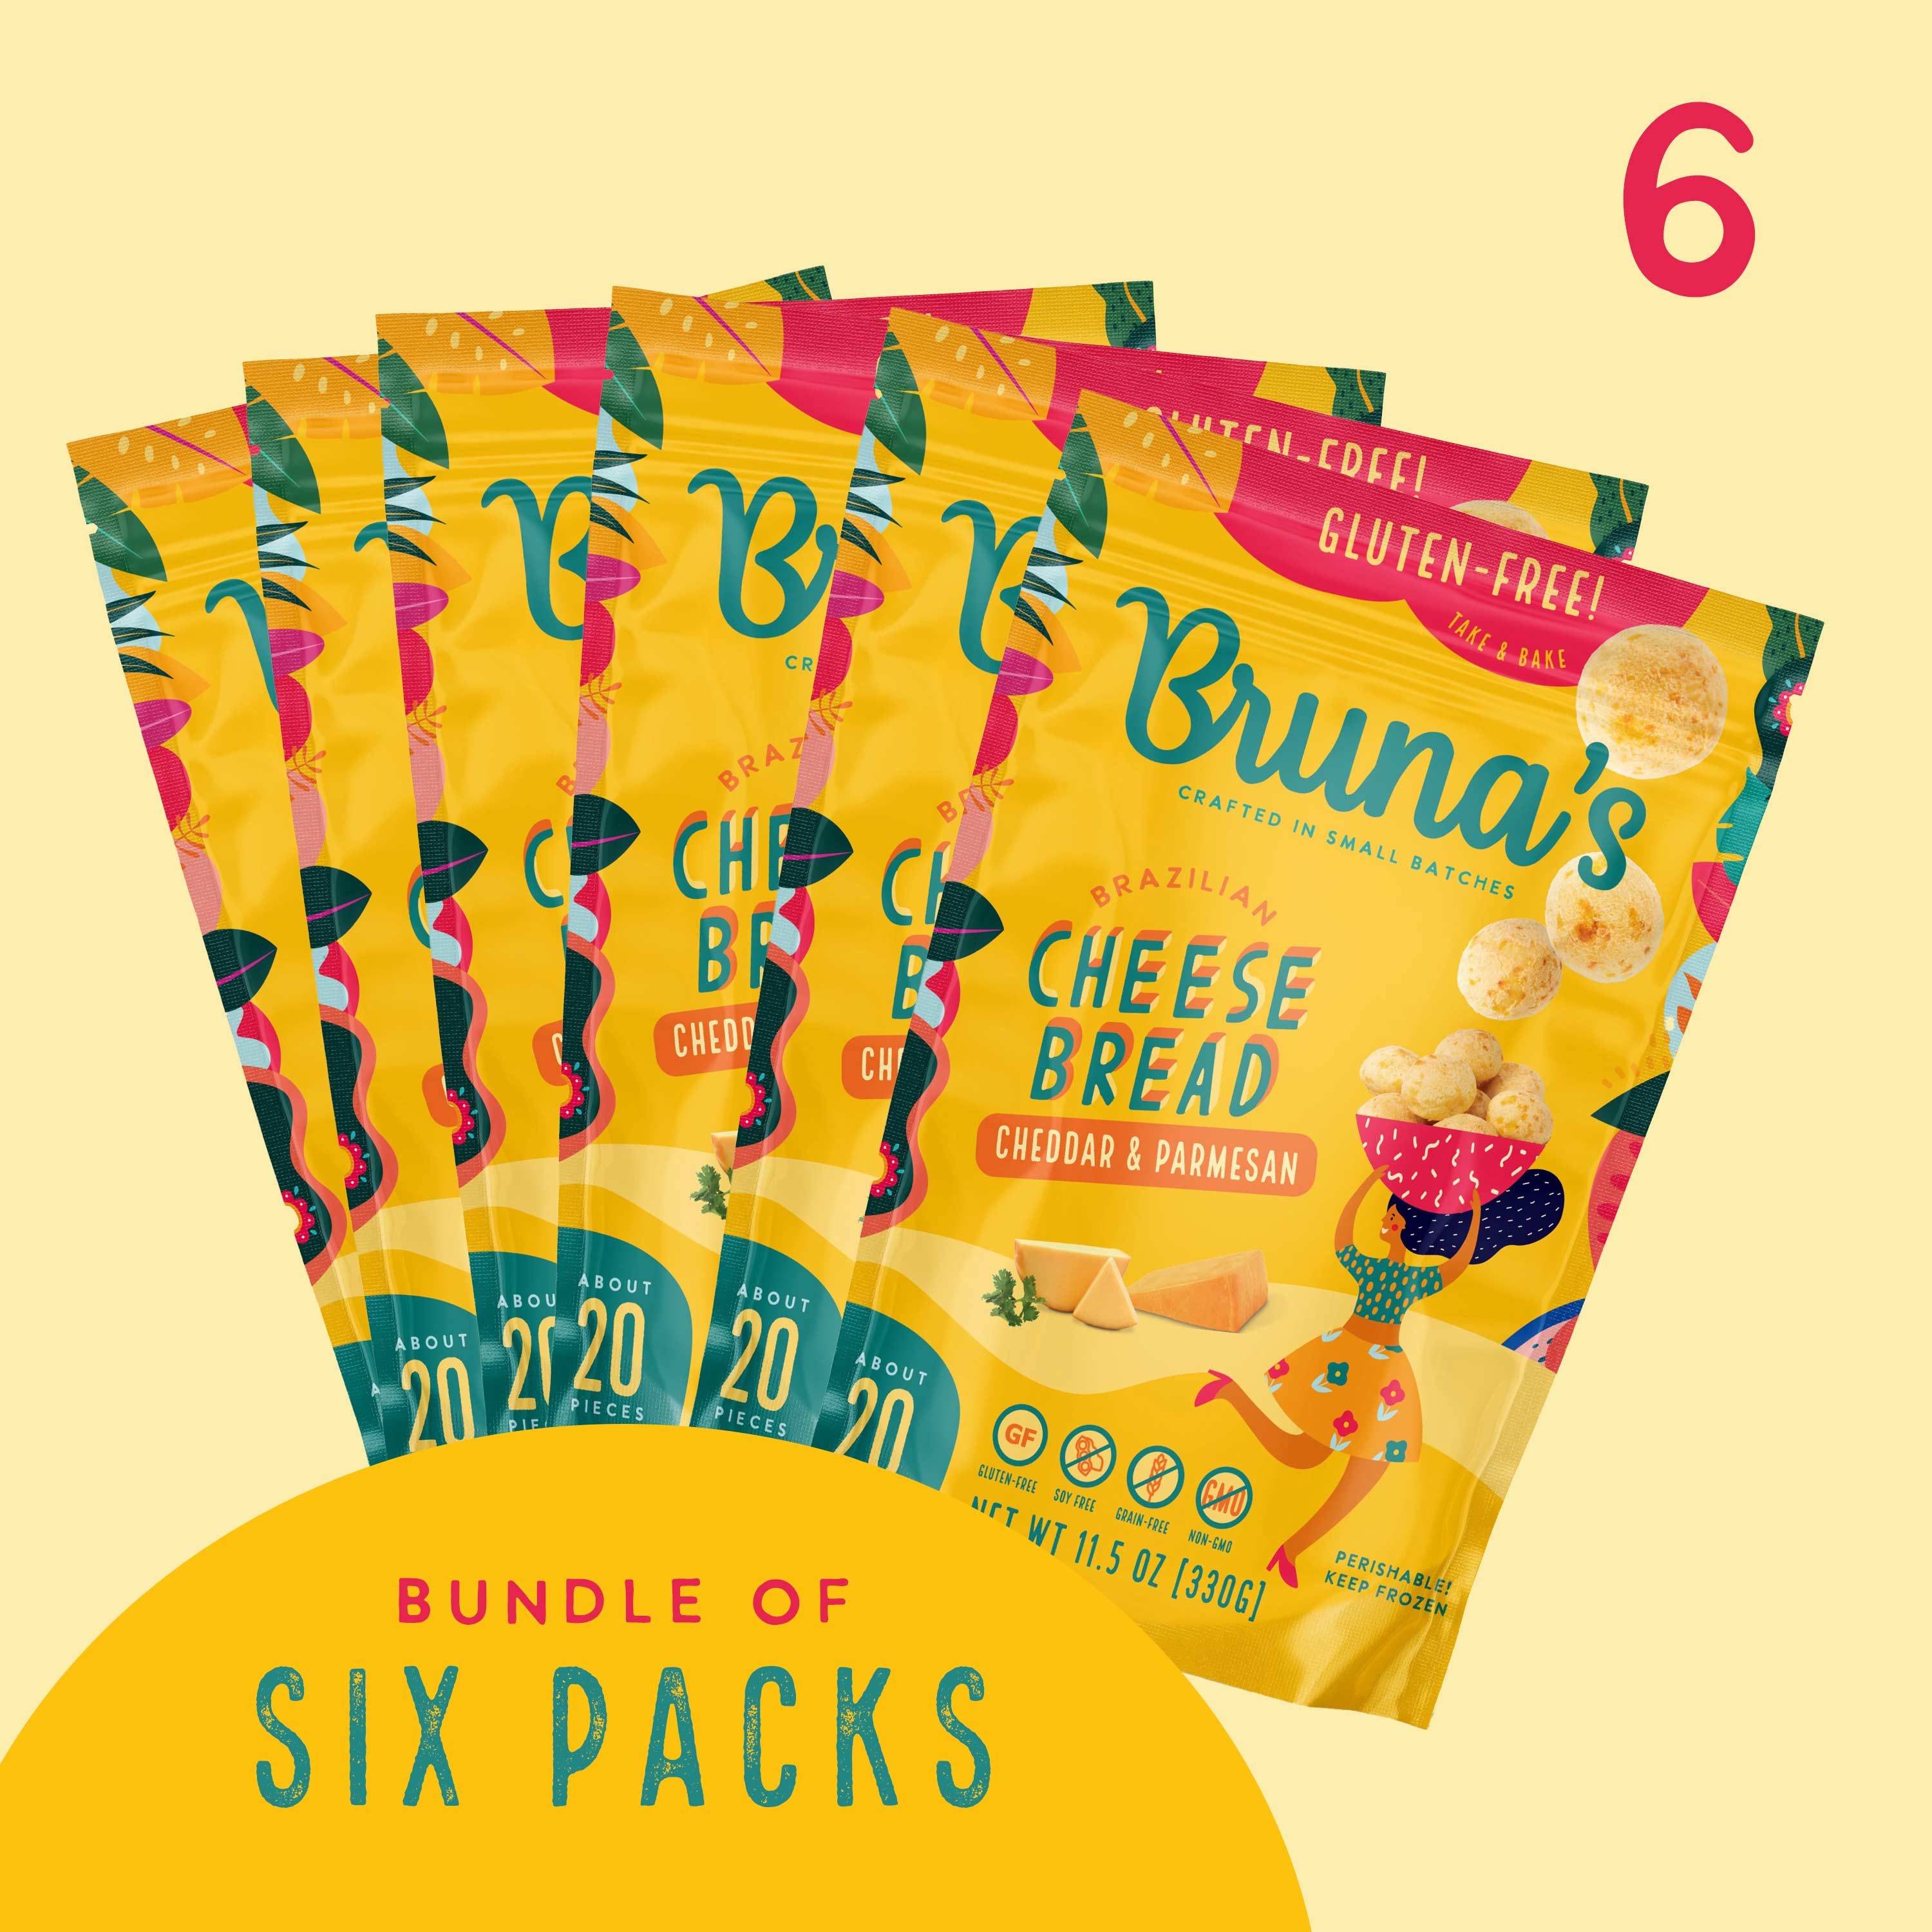 6 Pack of Bruna's Cheese Bread